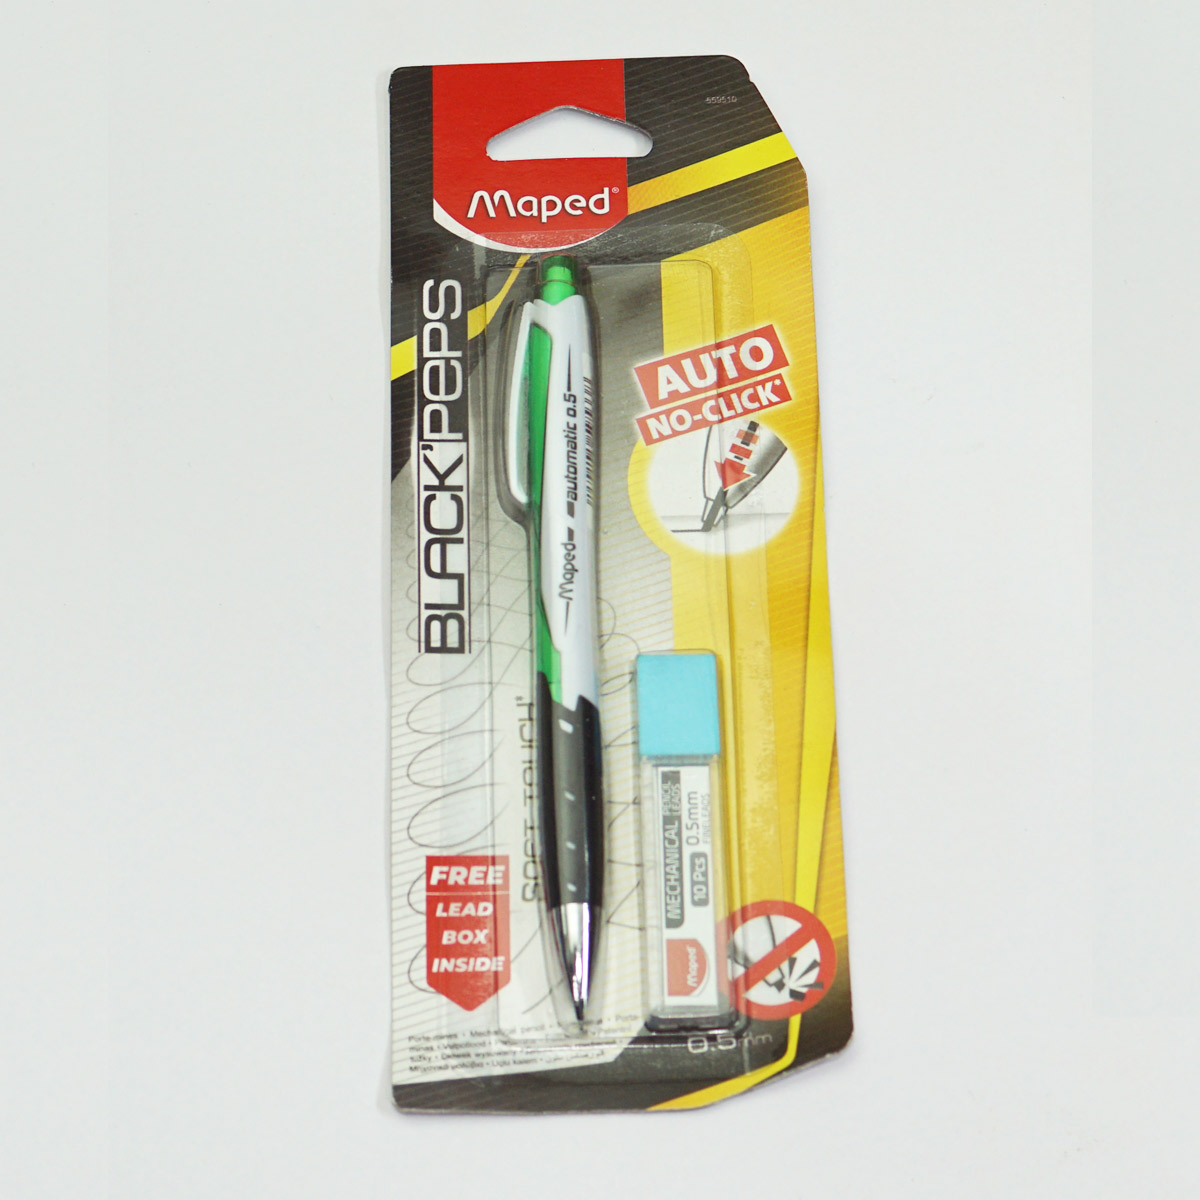 Maped 559510 Black Peps Green Color Body With 0.5 Fine Auto No-Click Mechanical Pencil With One Lead Box SKU 50108